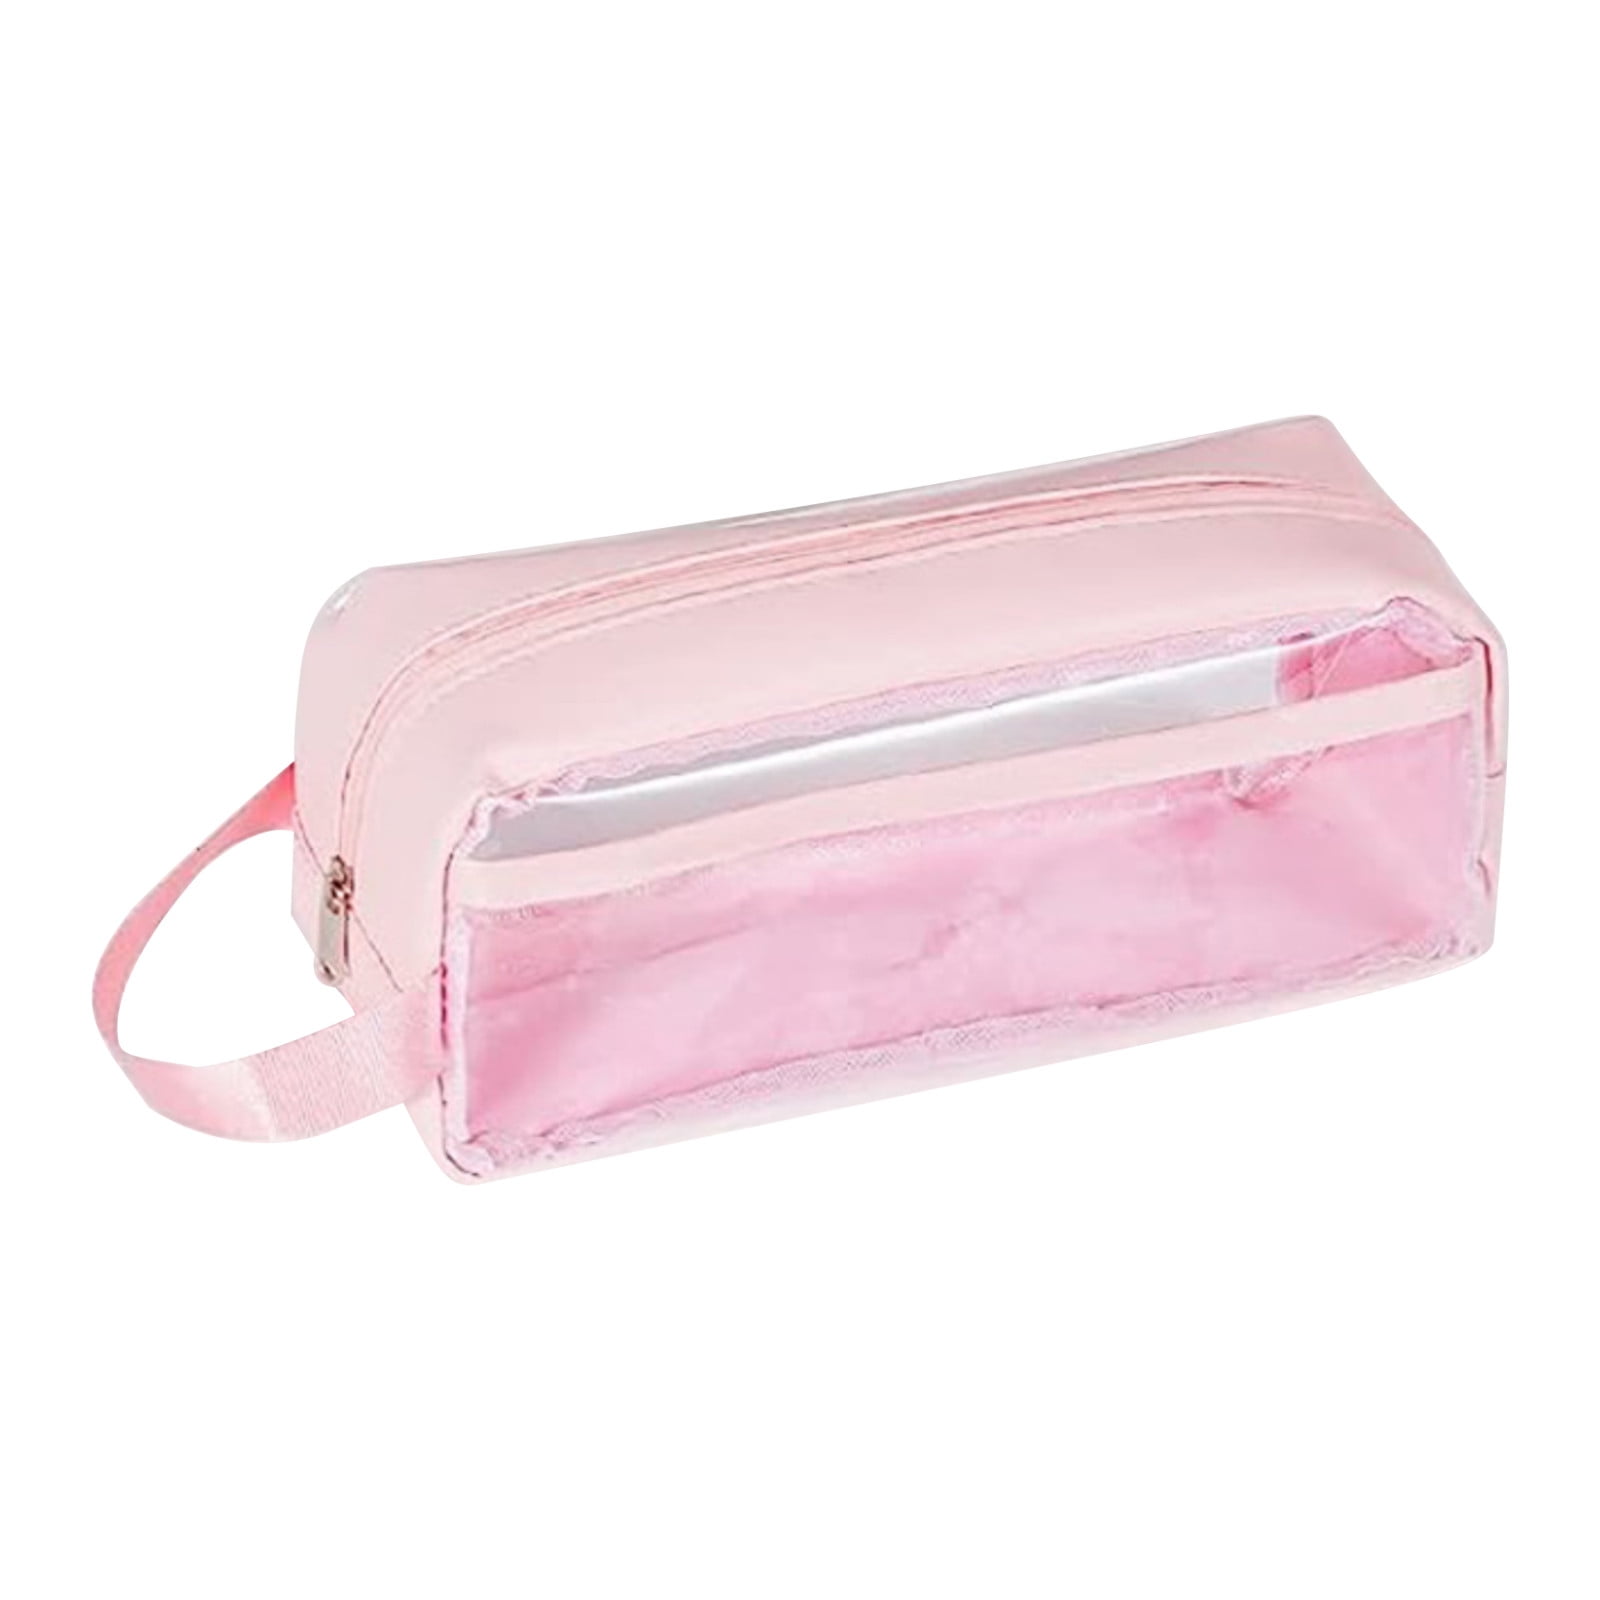 AONUOWE Kawaii Pencil Case Aesthetic Cute Pencil Case for Girls Clear Large Pencil Pouch Kawaii School Supplies for Teen Girls (Pink Bunny)